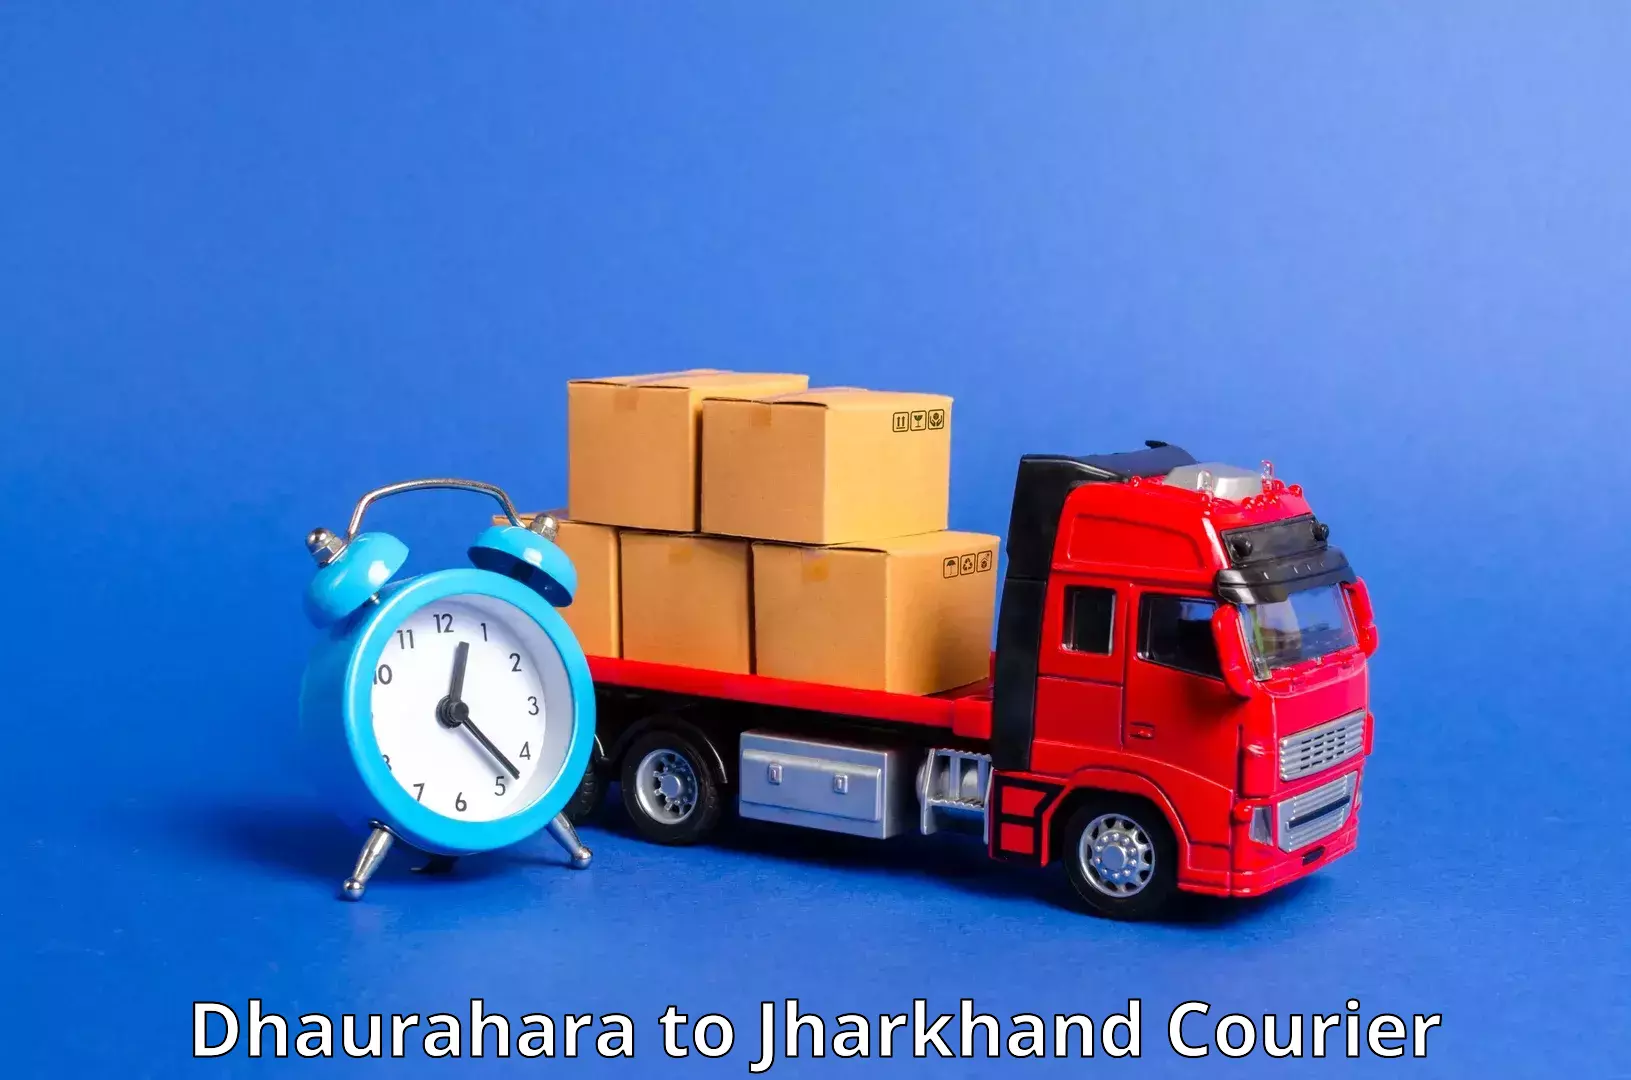 Efficient package consolidation in Dhaurahara to Chandil